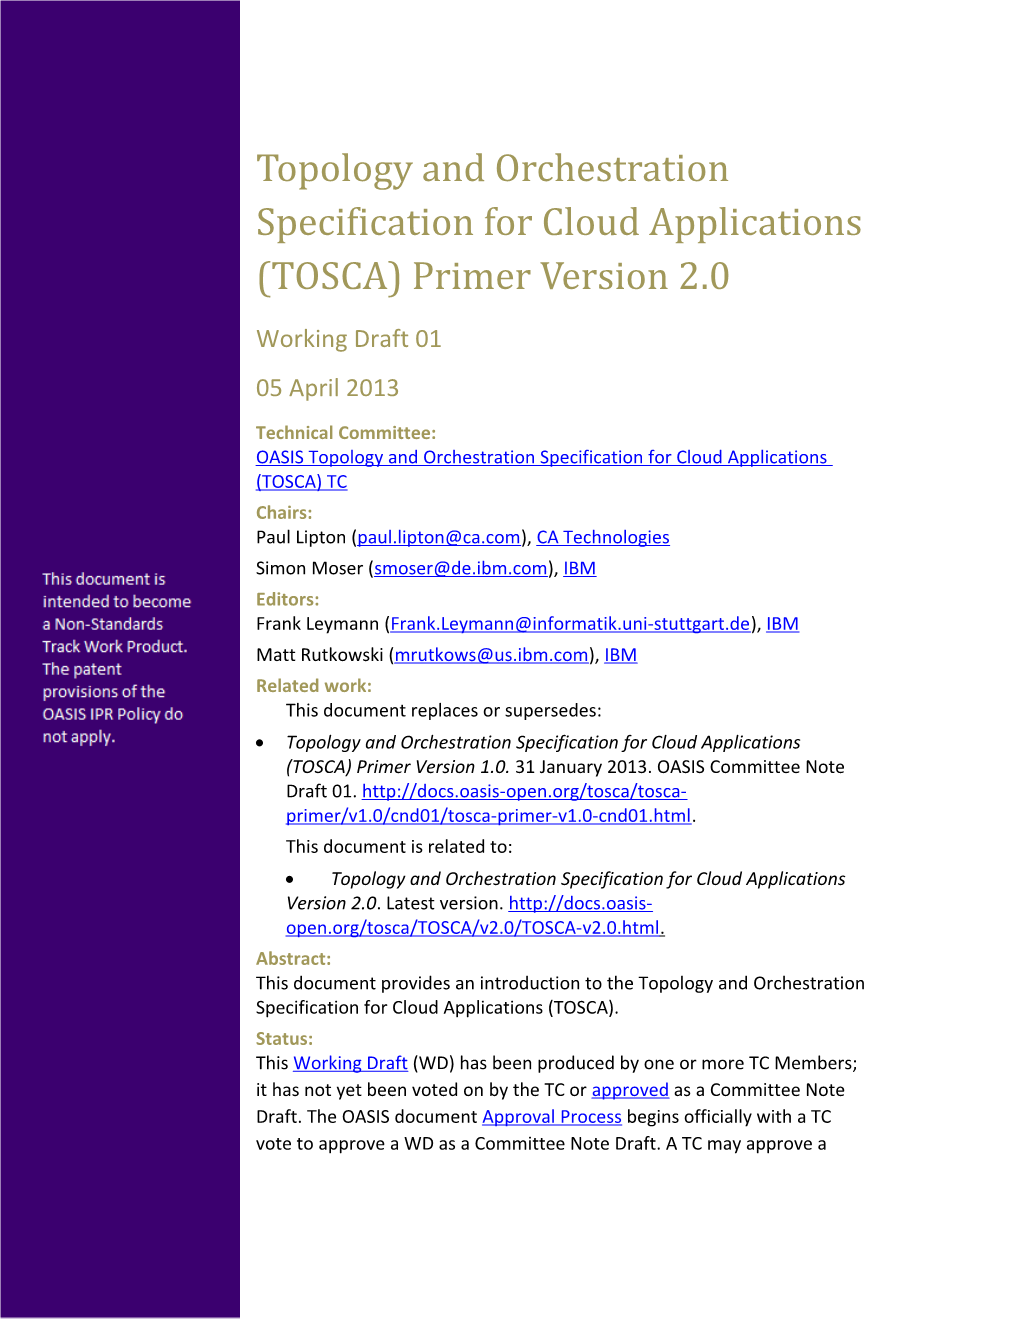 Topology and Orchestration Specification for Cloud Applications (TOSCA) Primer Version 2.0